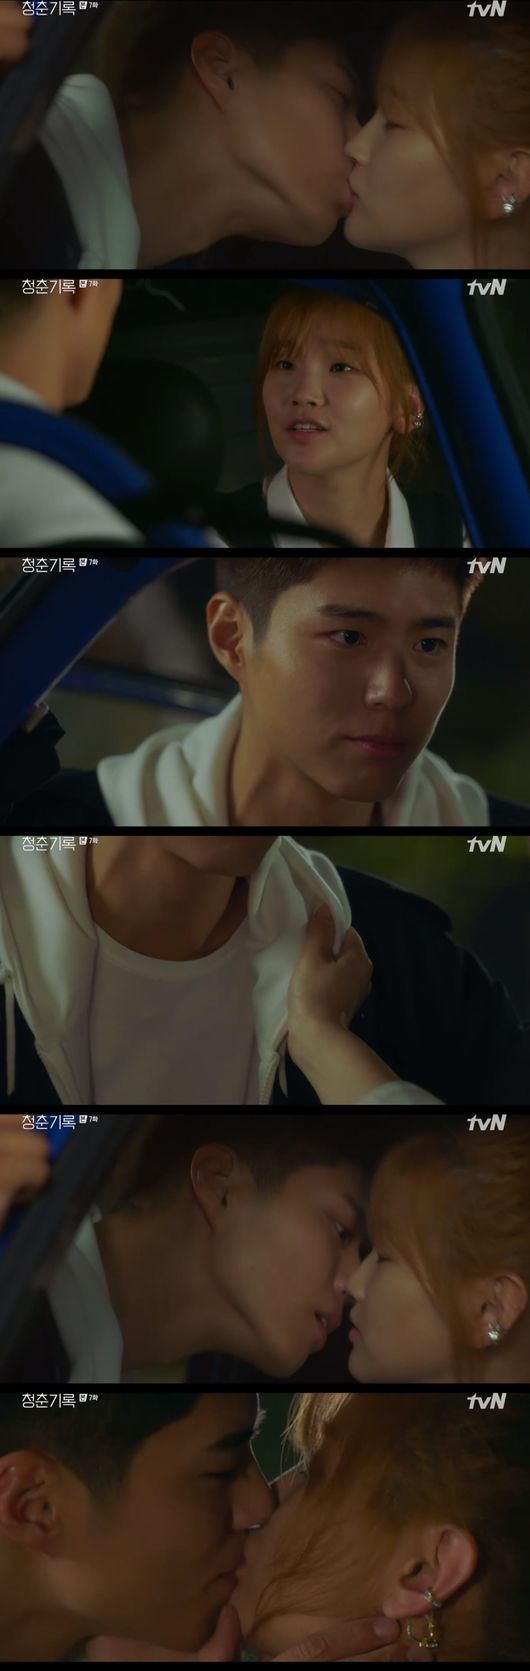 Park Bo-gum and Park So-dam confirm their hearts with kissIn TVN Record of Youth broadcast on the 28th, Sa Hye-joon (Park Bo-gum) and Park So-dam (Park So-dam) kissed each other in succession, giving comfort to each other.Sa Hye-joons father, Lingnan (Park Soo-young), was angry that his father, Sam Min-ki (Han Jin-hee), was attending a model academy.Are you trying to get me into trouble? said Samingi, I regret it a hundred times a day. I want to go back to old times and live differently.My dad did not know that. Samingi said, I want to let you know that I tried to be a good father even if it was not a good father. Lingnan regretted hitting his son, Sa Hye-joon, and stood in front of the door and waited for his son.Sa Hye-joon and Sa Hye-joon enjoyed dating affectionately. I want to do something now, but I need permission.So, he said, I will allow it, and Sa Hye-joon kissed An Jeong-ha again.I thought about it, but I can do it anytime. So, Sa Hye-joon said, You are anything.So I pulled the clothes of Sa Hye-joon, who was stable, and kissed again romantically.Meanwhile, I cared what a stable pearl designer said: Whats my reputation in the shop? So Suvin said, Just a little rumor.No one believes me, he said. I was told that it was a killer who took only male customers from Jinju Sam. He was upset and said, I still have to do my job.I went to the schedule with a stable one. Won asked, Whats going on? And Im sure youll think its just routine.Life is not the original flower path, it is the construction board, he said.Won Hae-hyo asked Ahn Hye-joons regards to Ahn Hye-joon. Won Hae-hyo told Ahn Jung-ha, Hye-joon is capable when he sees him laughing at the construction board.An Jeong-ha nodded and admitted that he was capable.When the film was finished, Won Hae-hyo left the filming site alone. Won Hae-hyo followed the story that Ahn Jung-ha went alone and caught up with him.We have to hit the ending. OK, lets end it. Thank you today. Won Hae-hyo whispered Do not go behind the distant stability.But he did not hear the stable one and went away.TVN Record of Youth broadcast capture